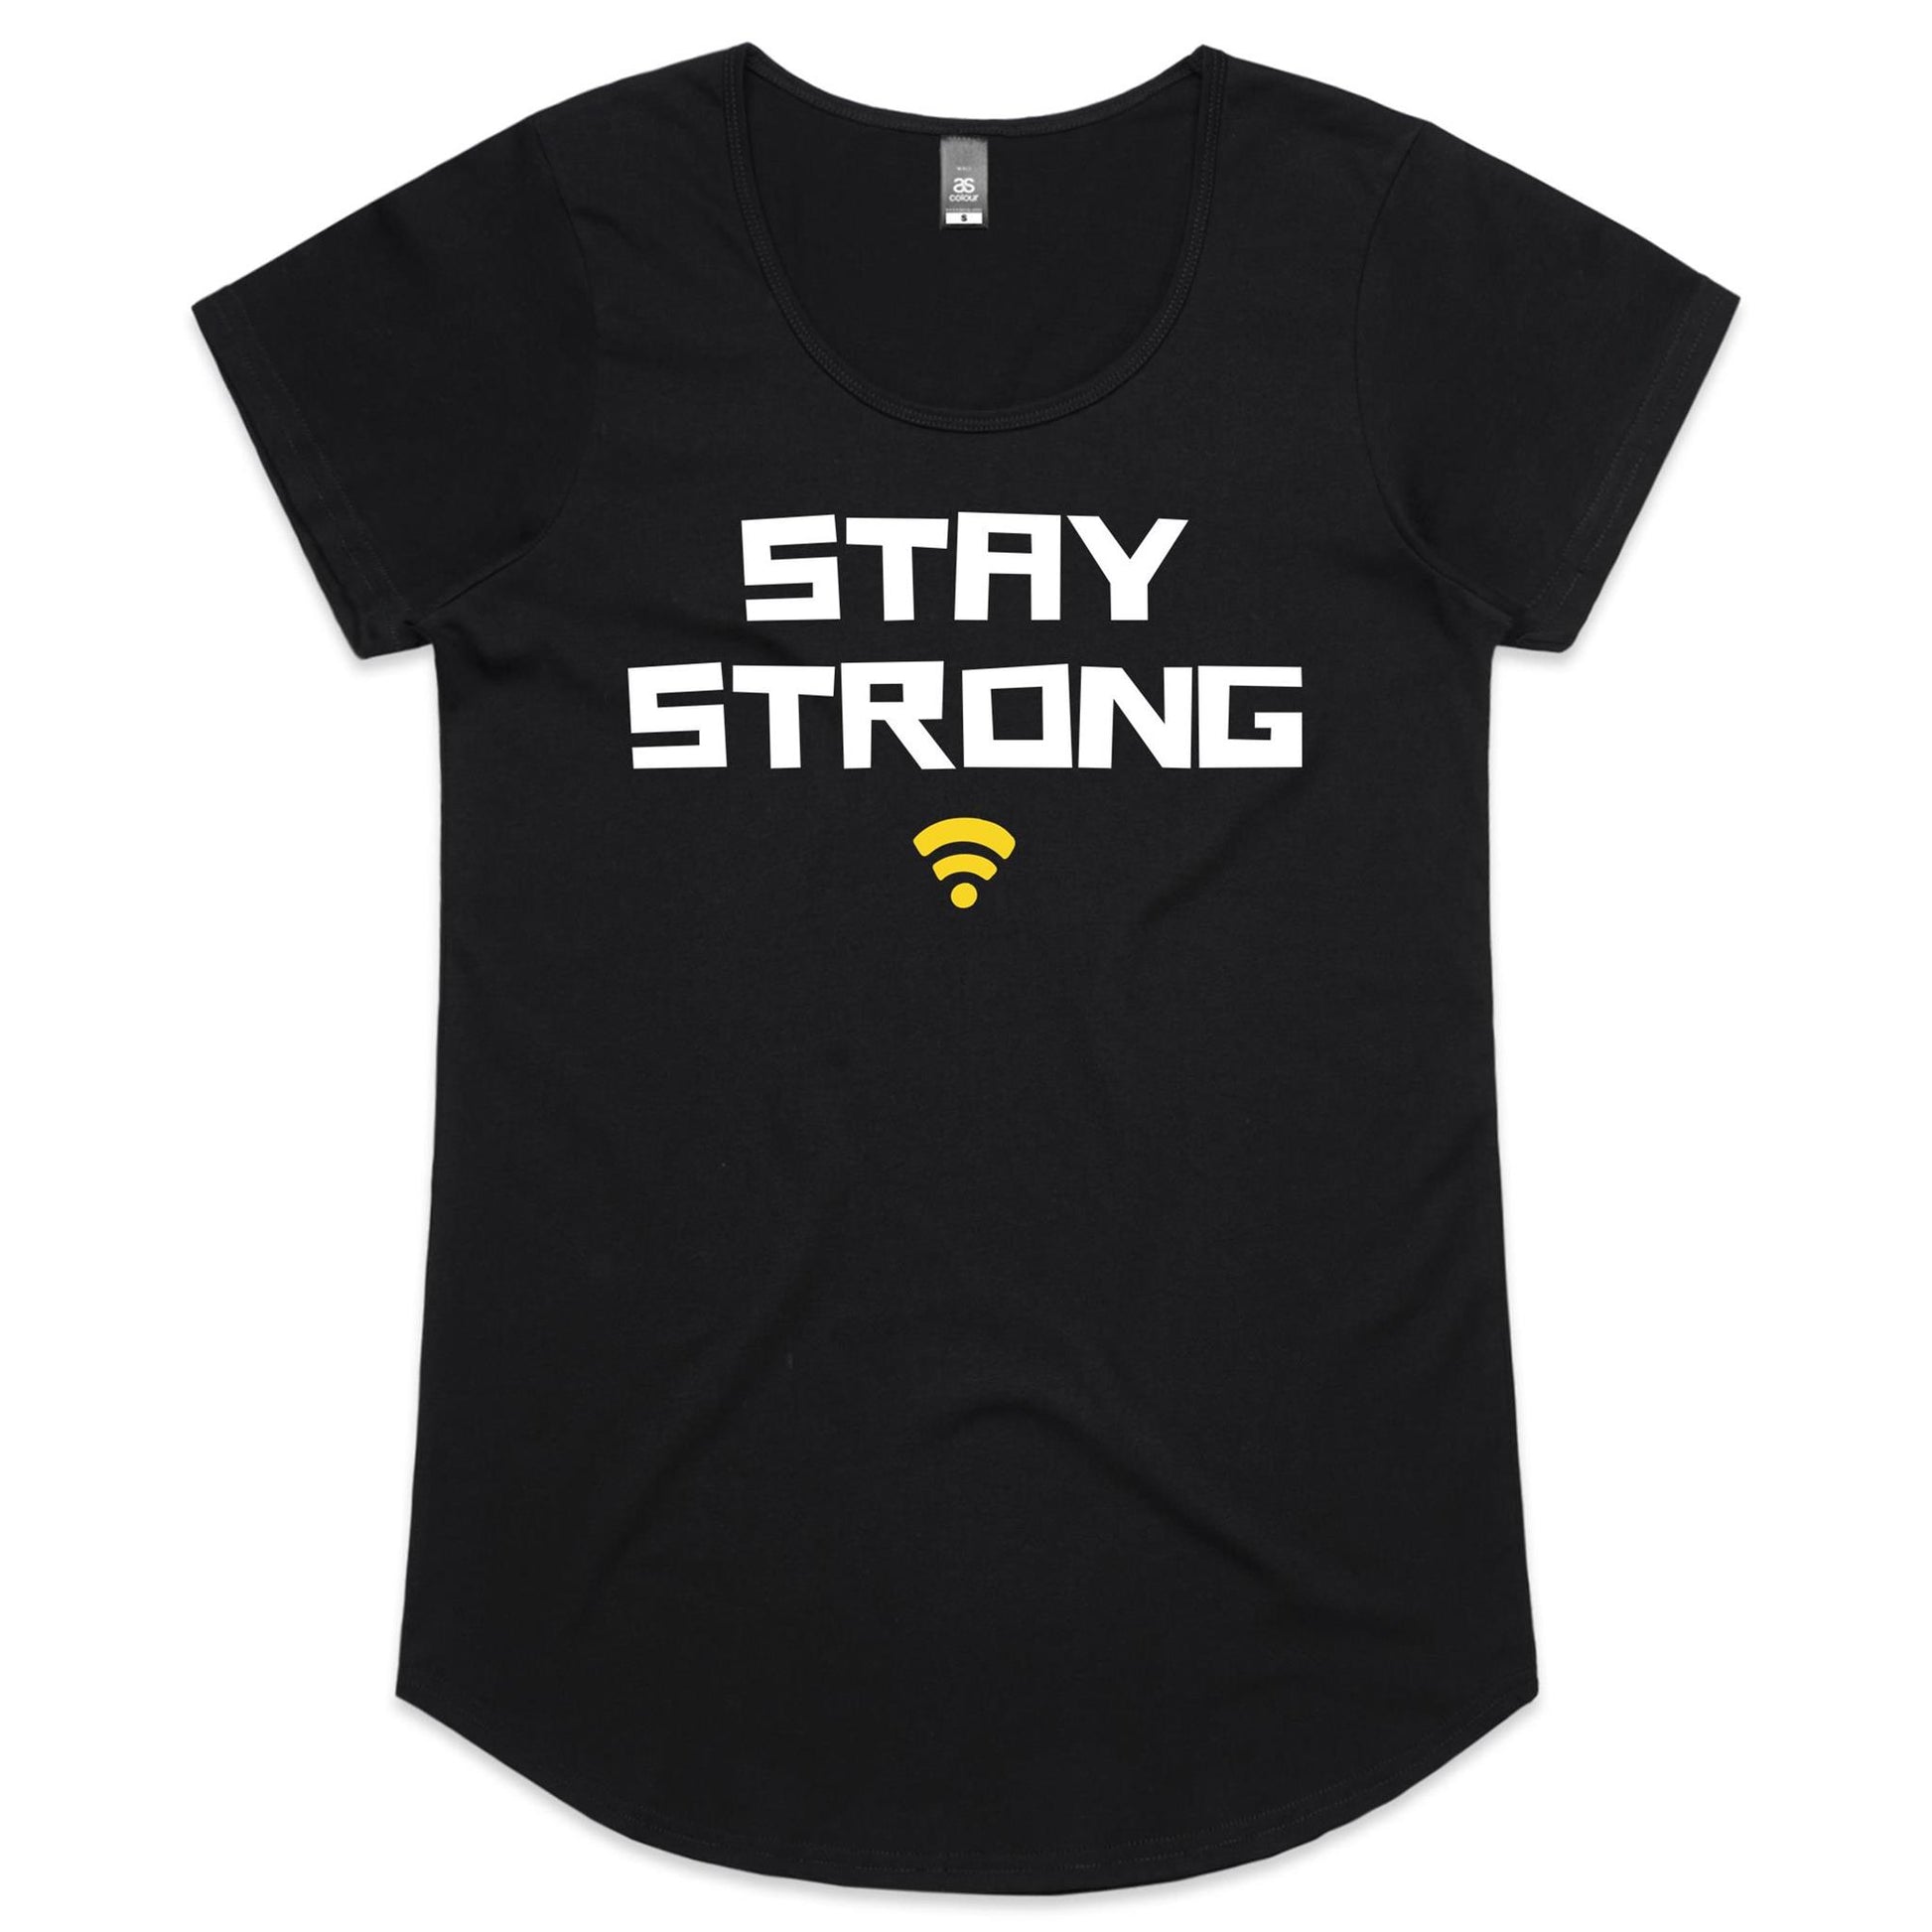 Stay Strong - Womens Scoop Neck T-Shirt Black Womens Scoop Neck T-shirt Tech